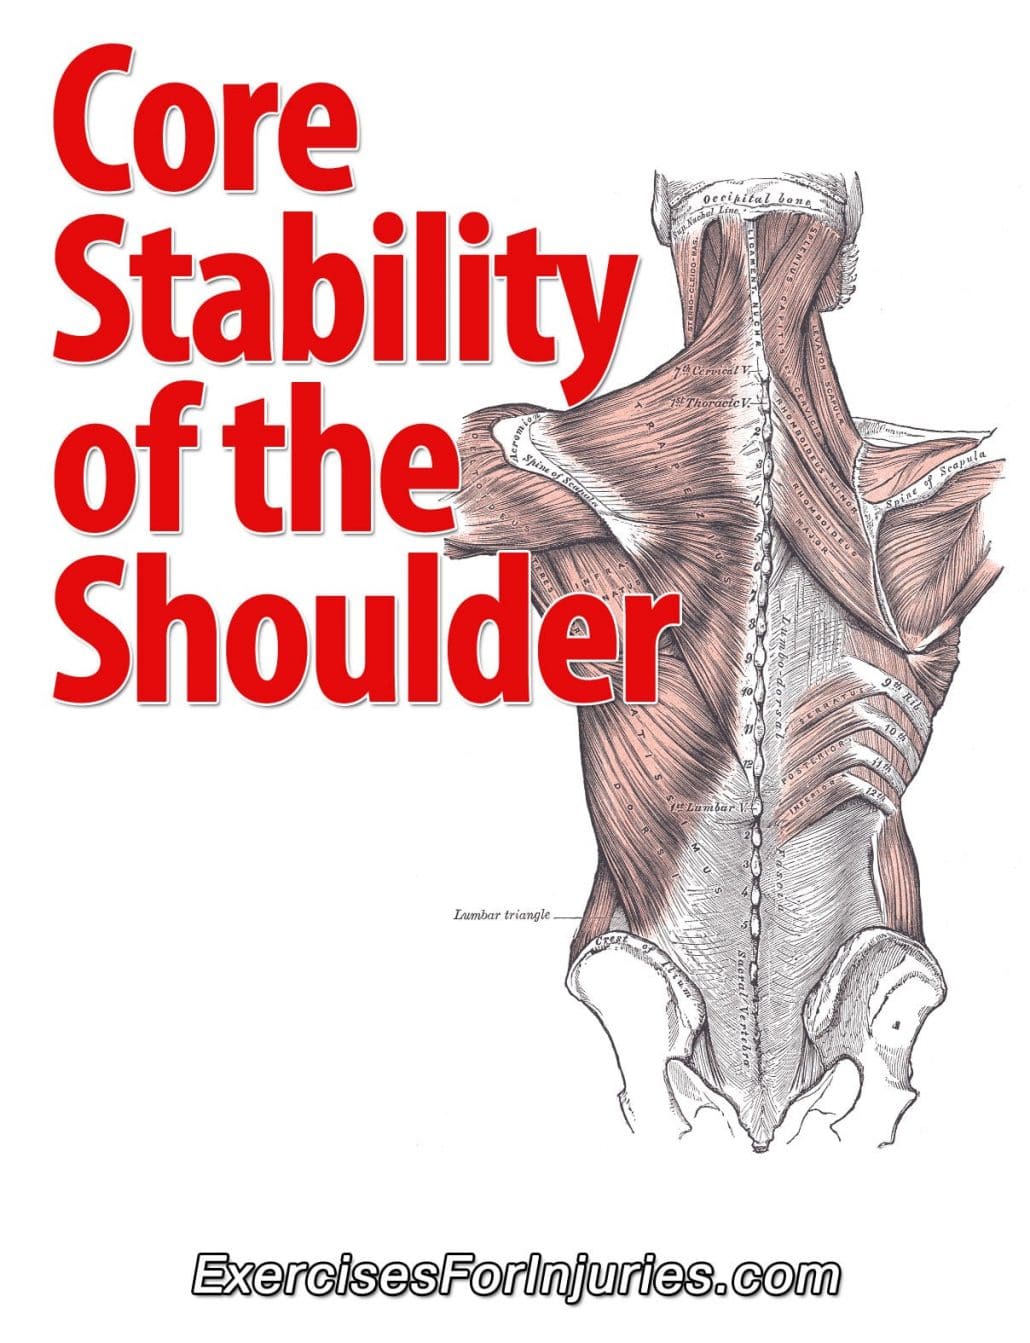 Core-Stability-of-the-Shoulder